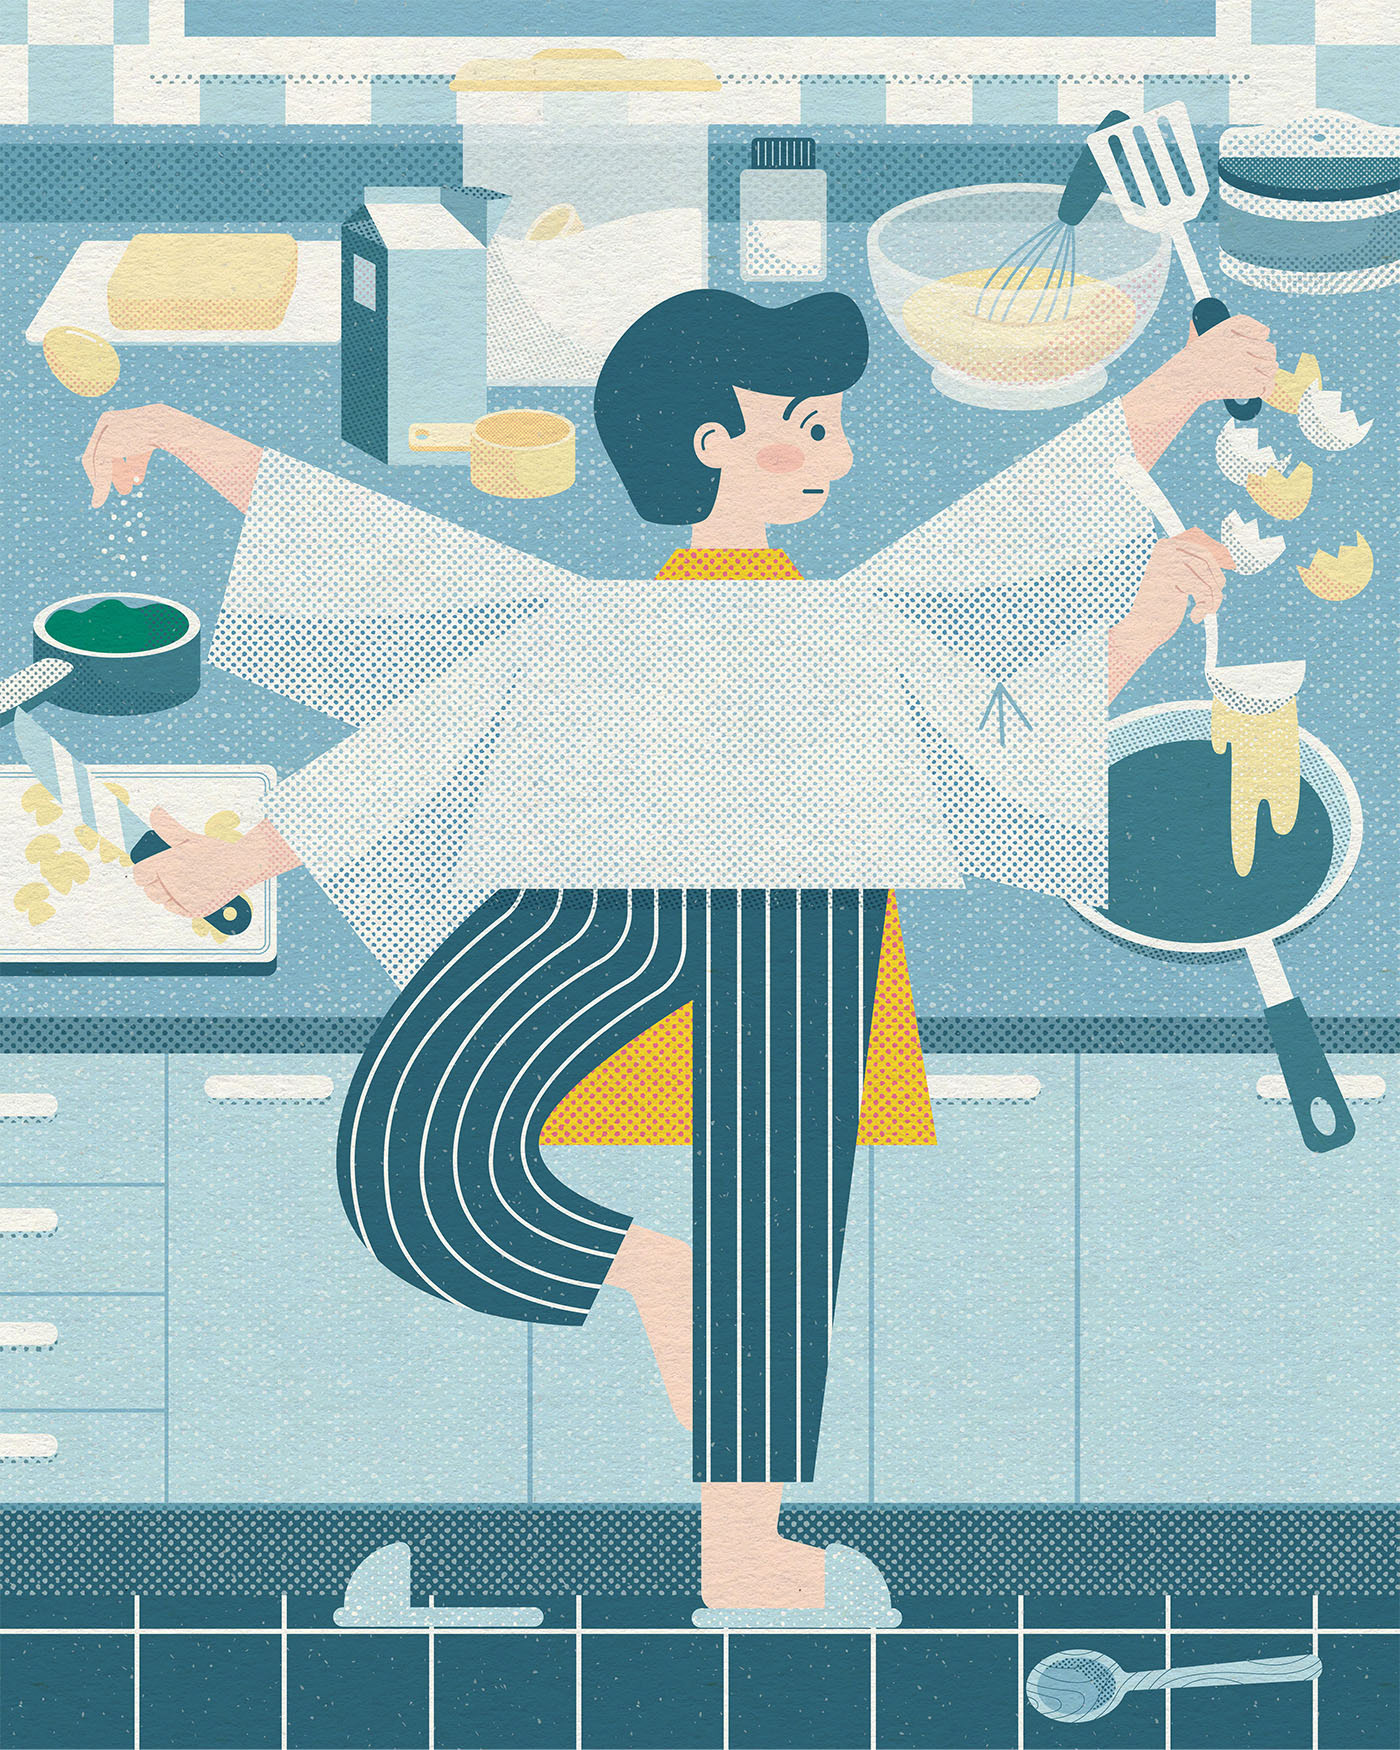 Illustrated recipe of a woman making crepes